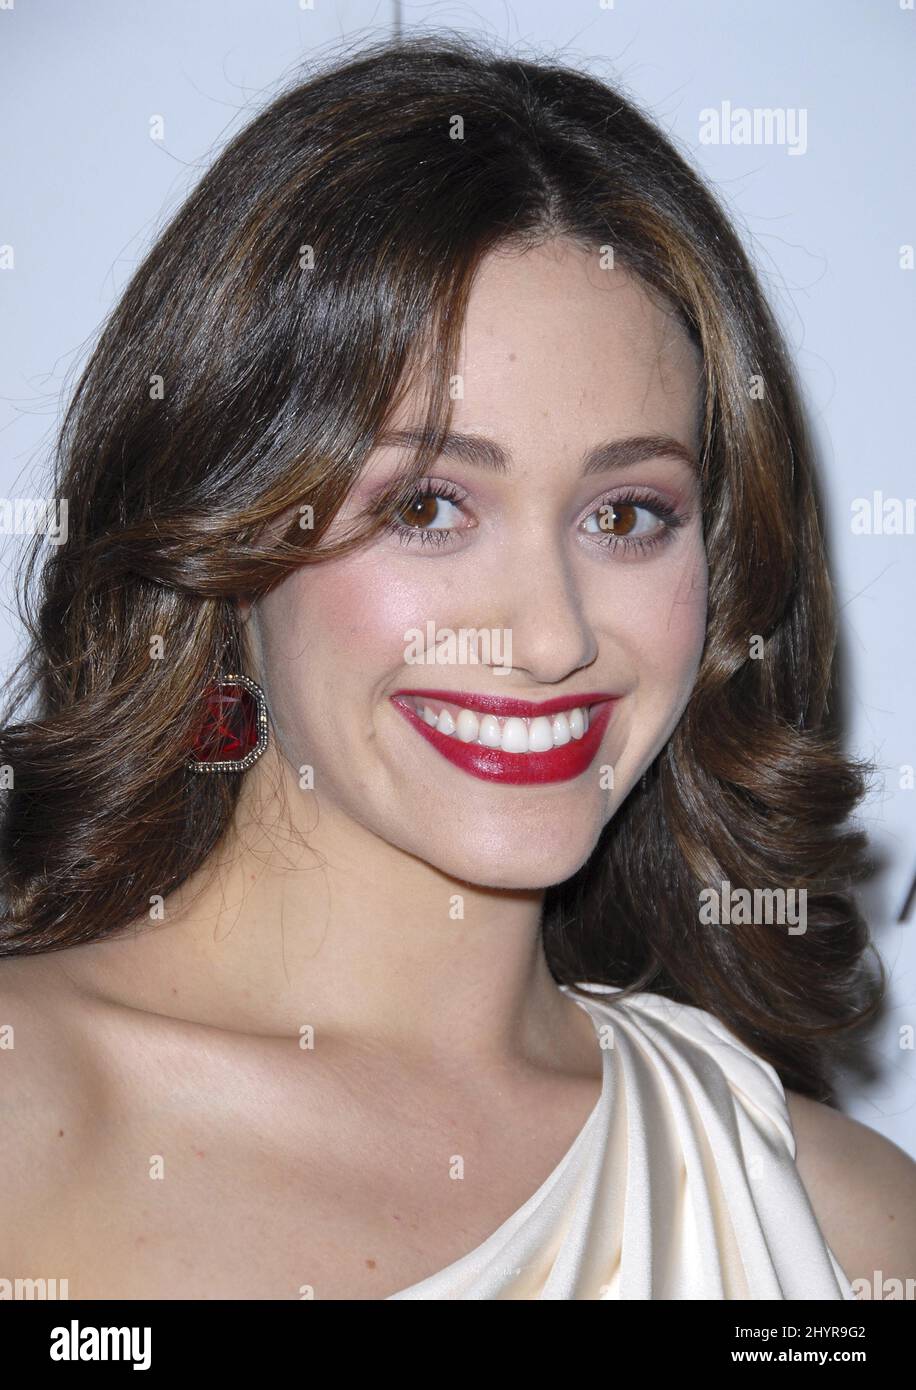 Emmy Rossum celebrates the Release of her Debut Album 'Inside Out' in ...